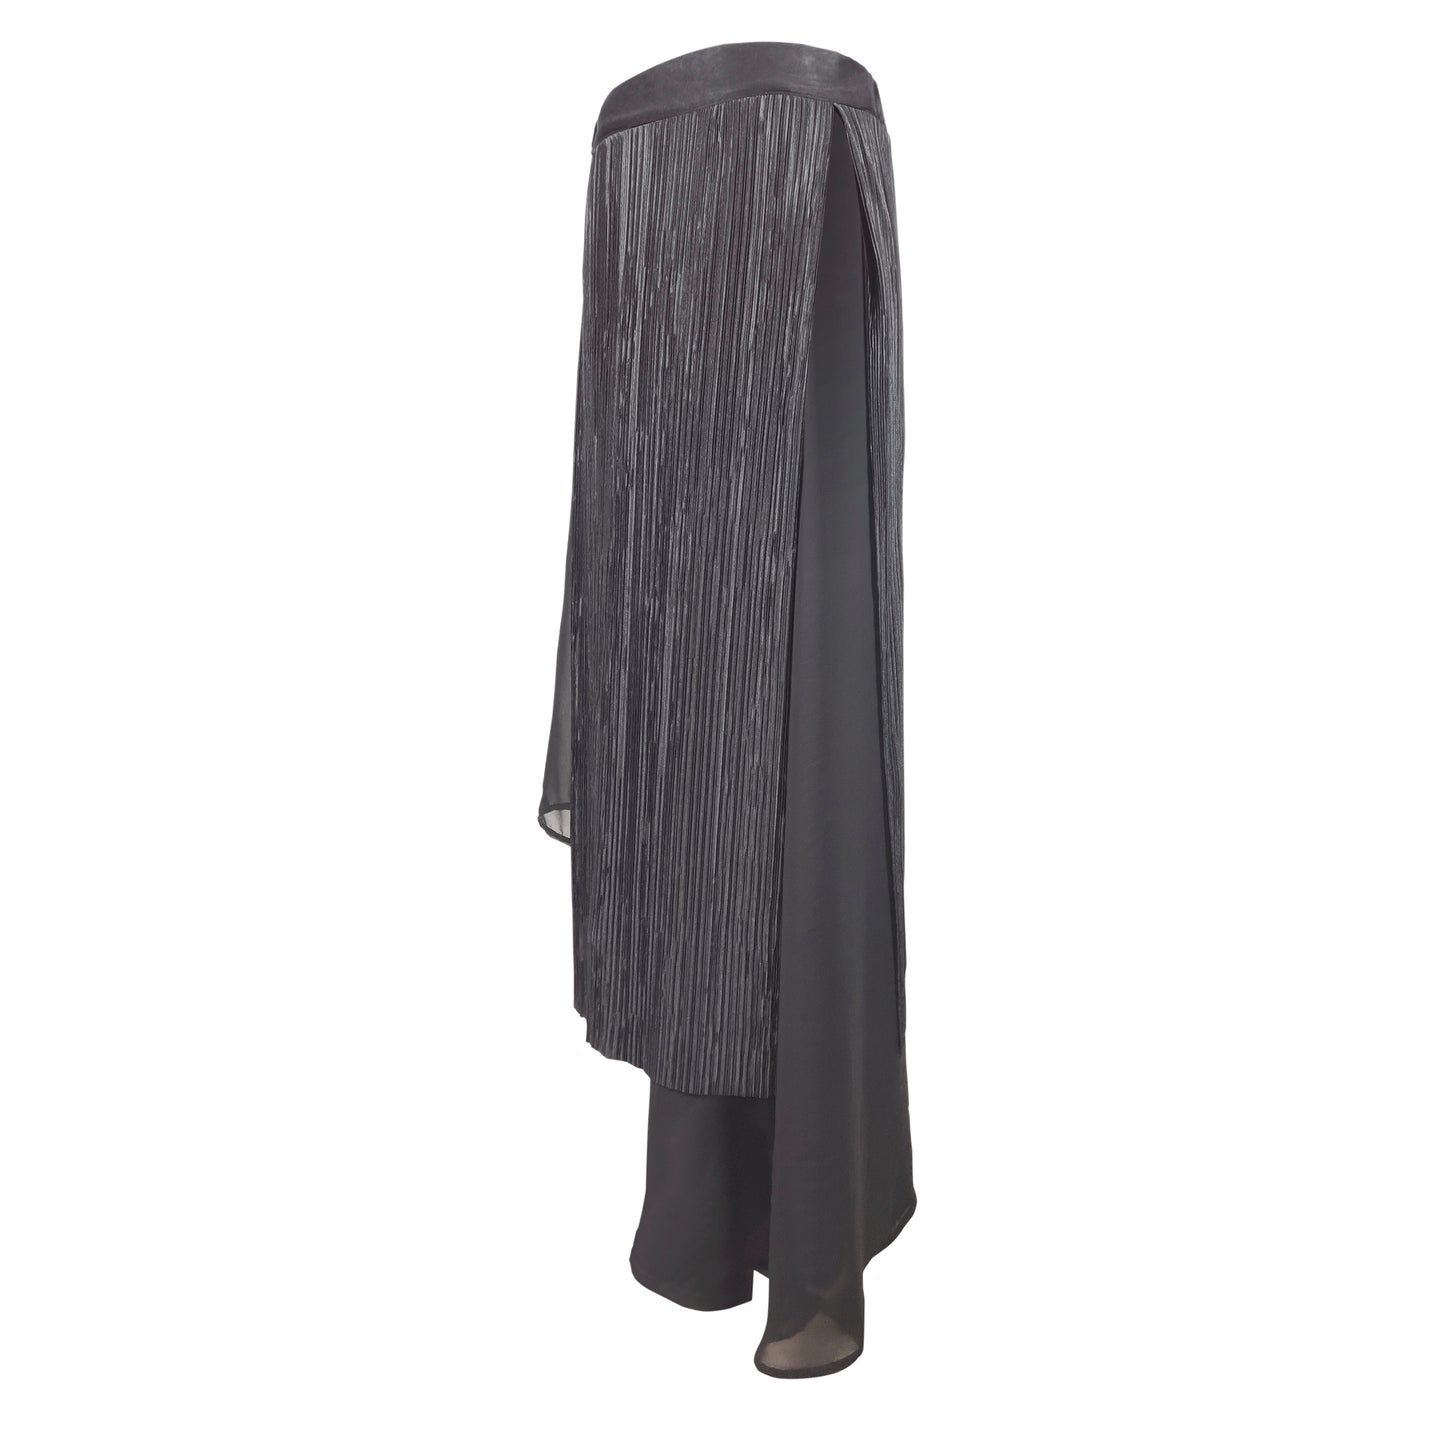 Asymmetrical Paneled Skirt With Side Clasp - LLESSUR NYC